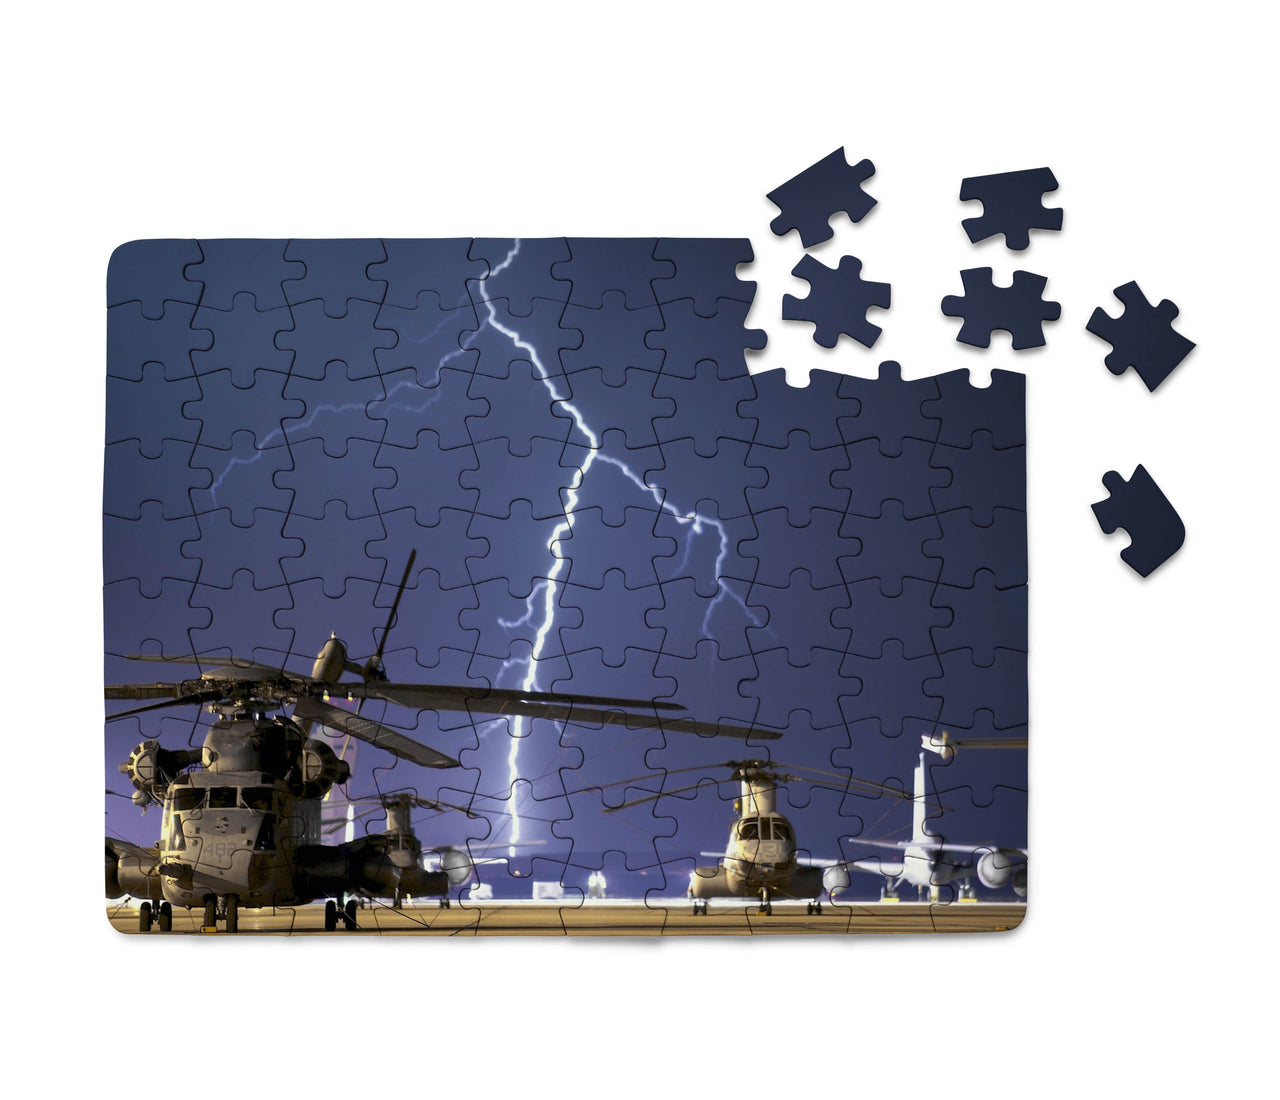 Helicopter & Lighting Strike Printed Puzzles Aviation Shop 